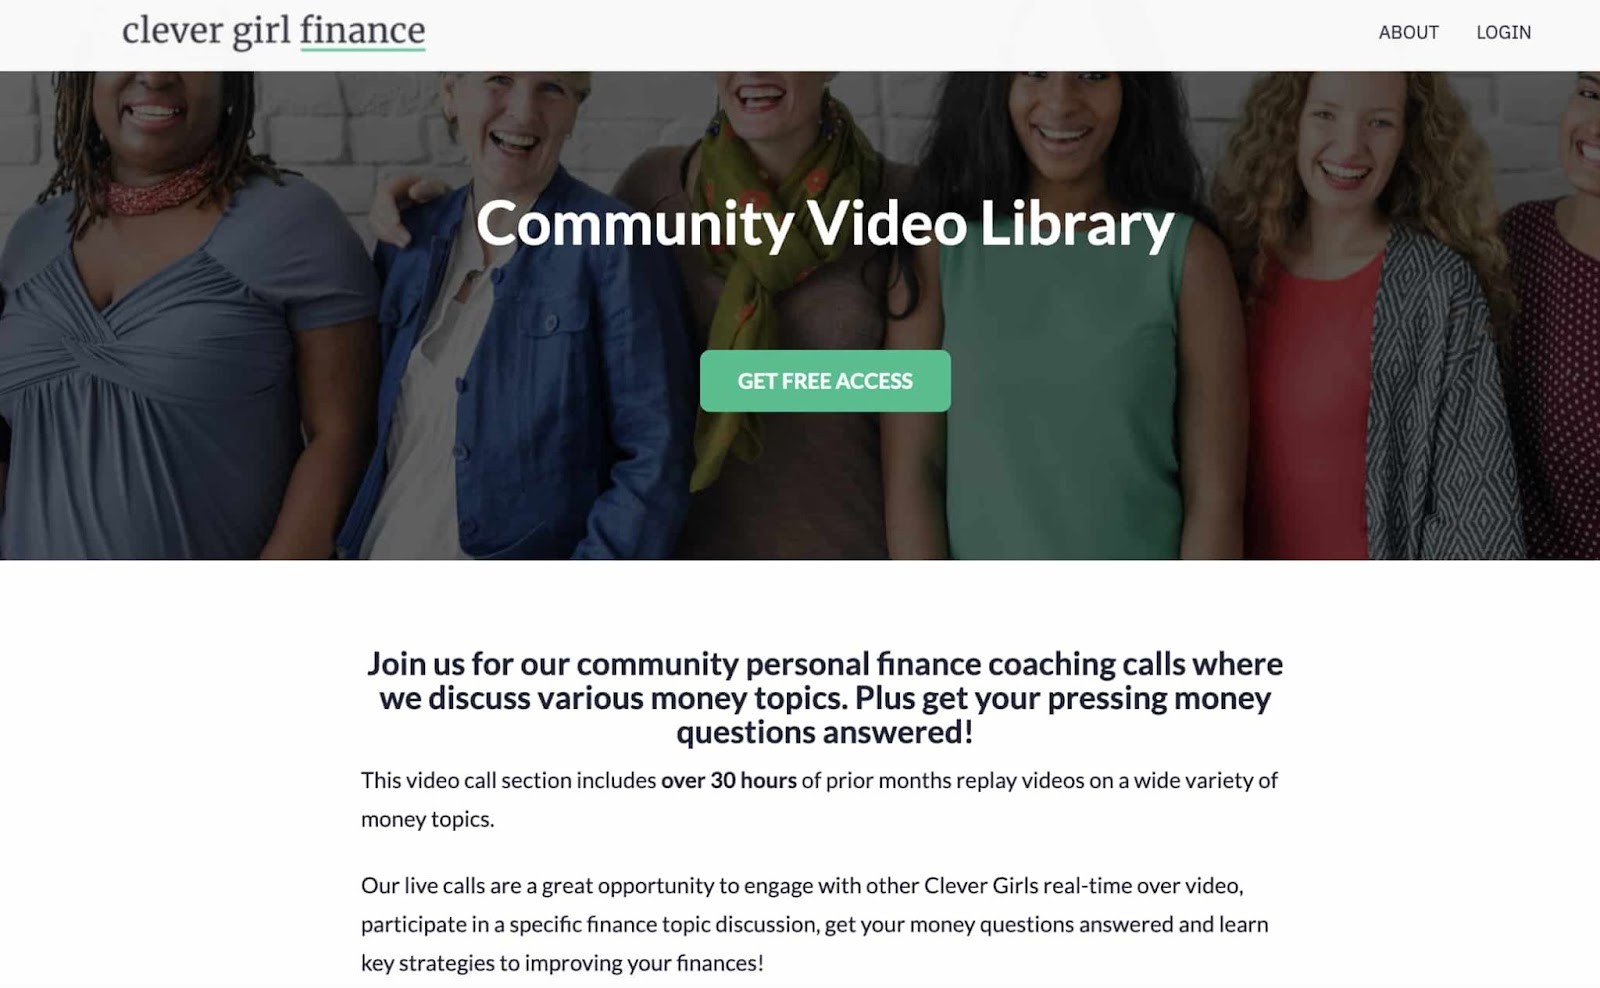 Clevel Girl Finance's resource library lead magnet